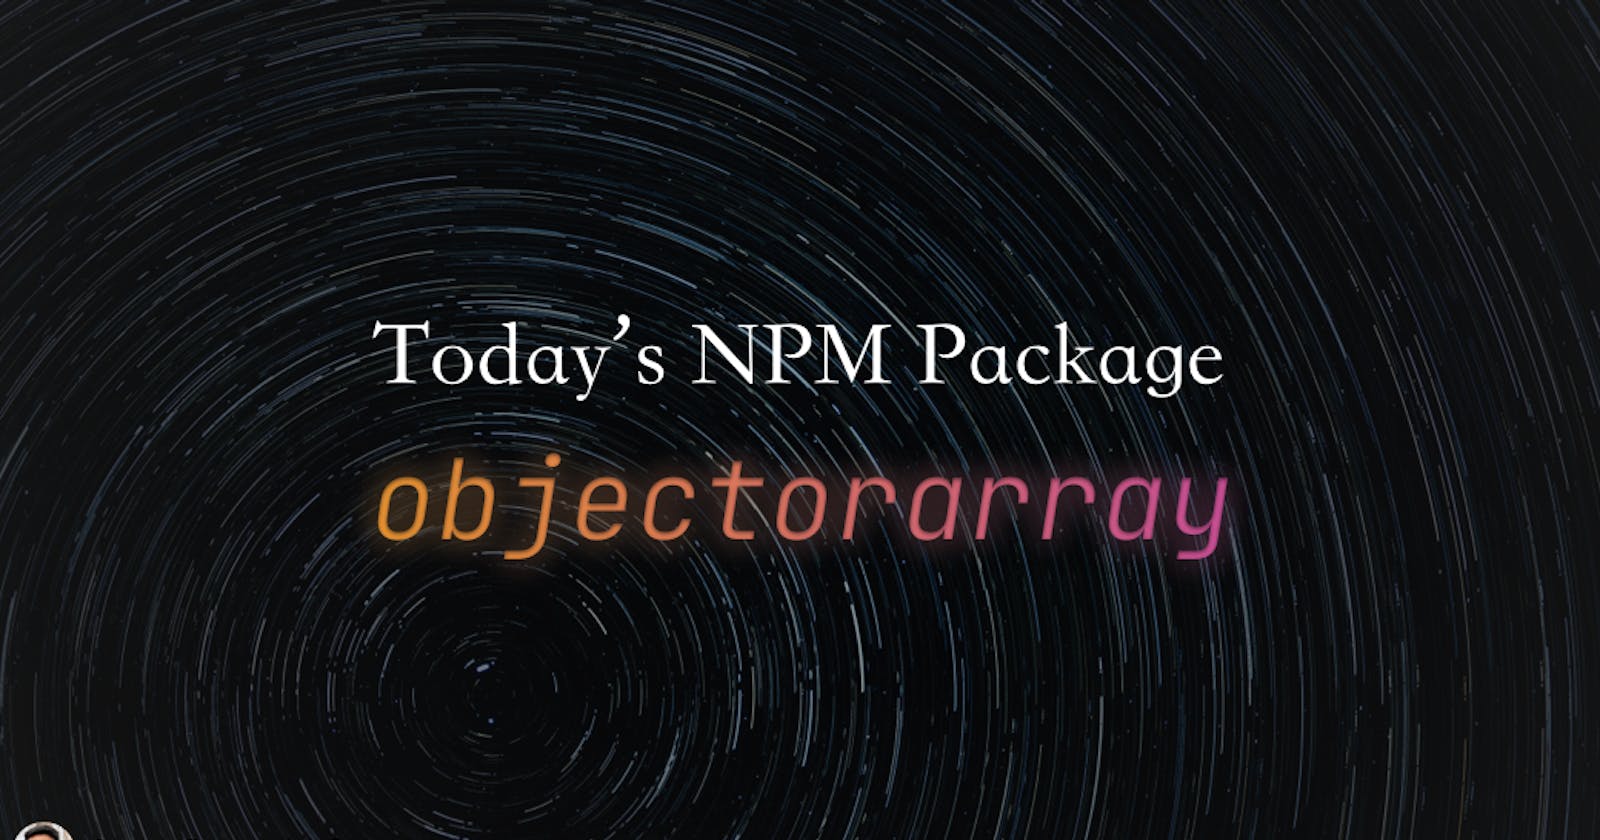 Today's npm package: objectorarray